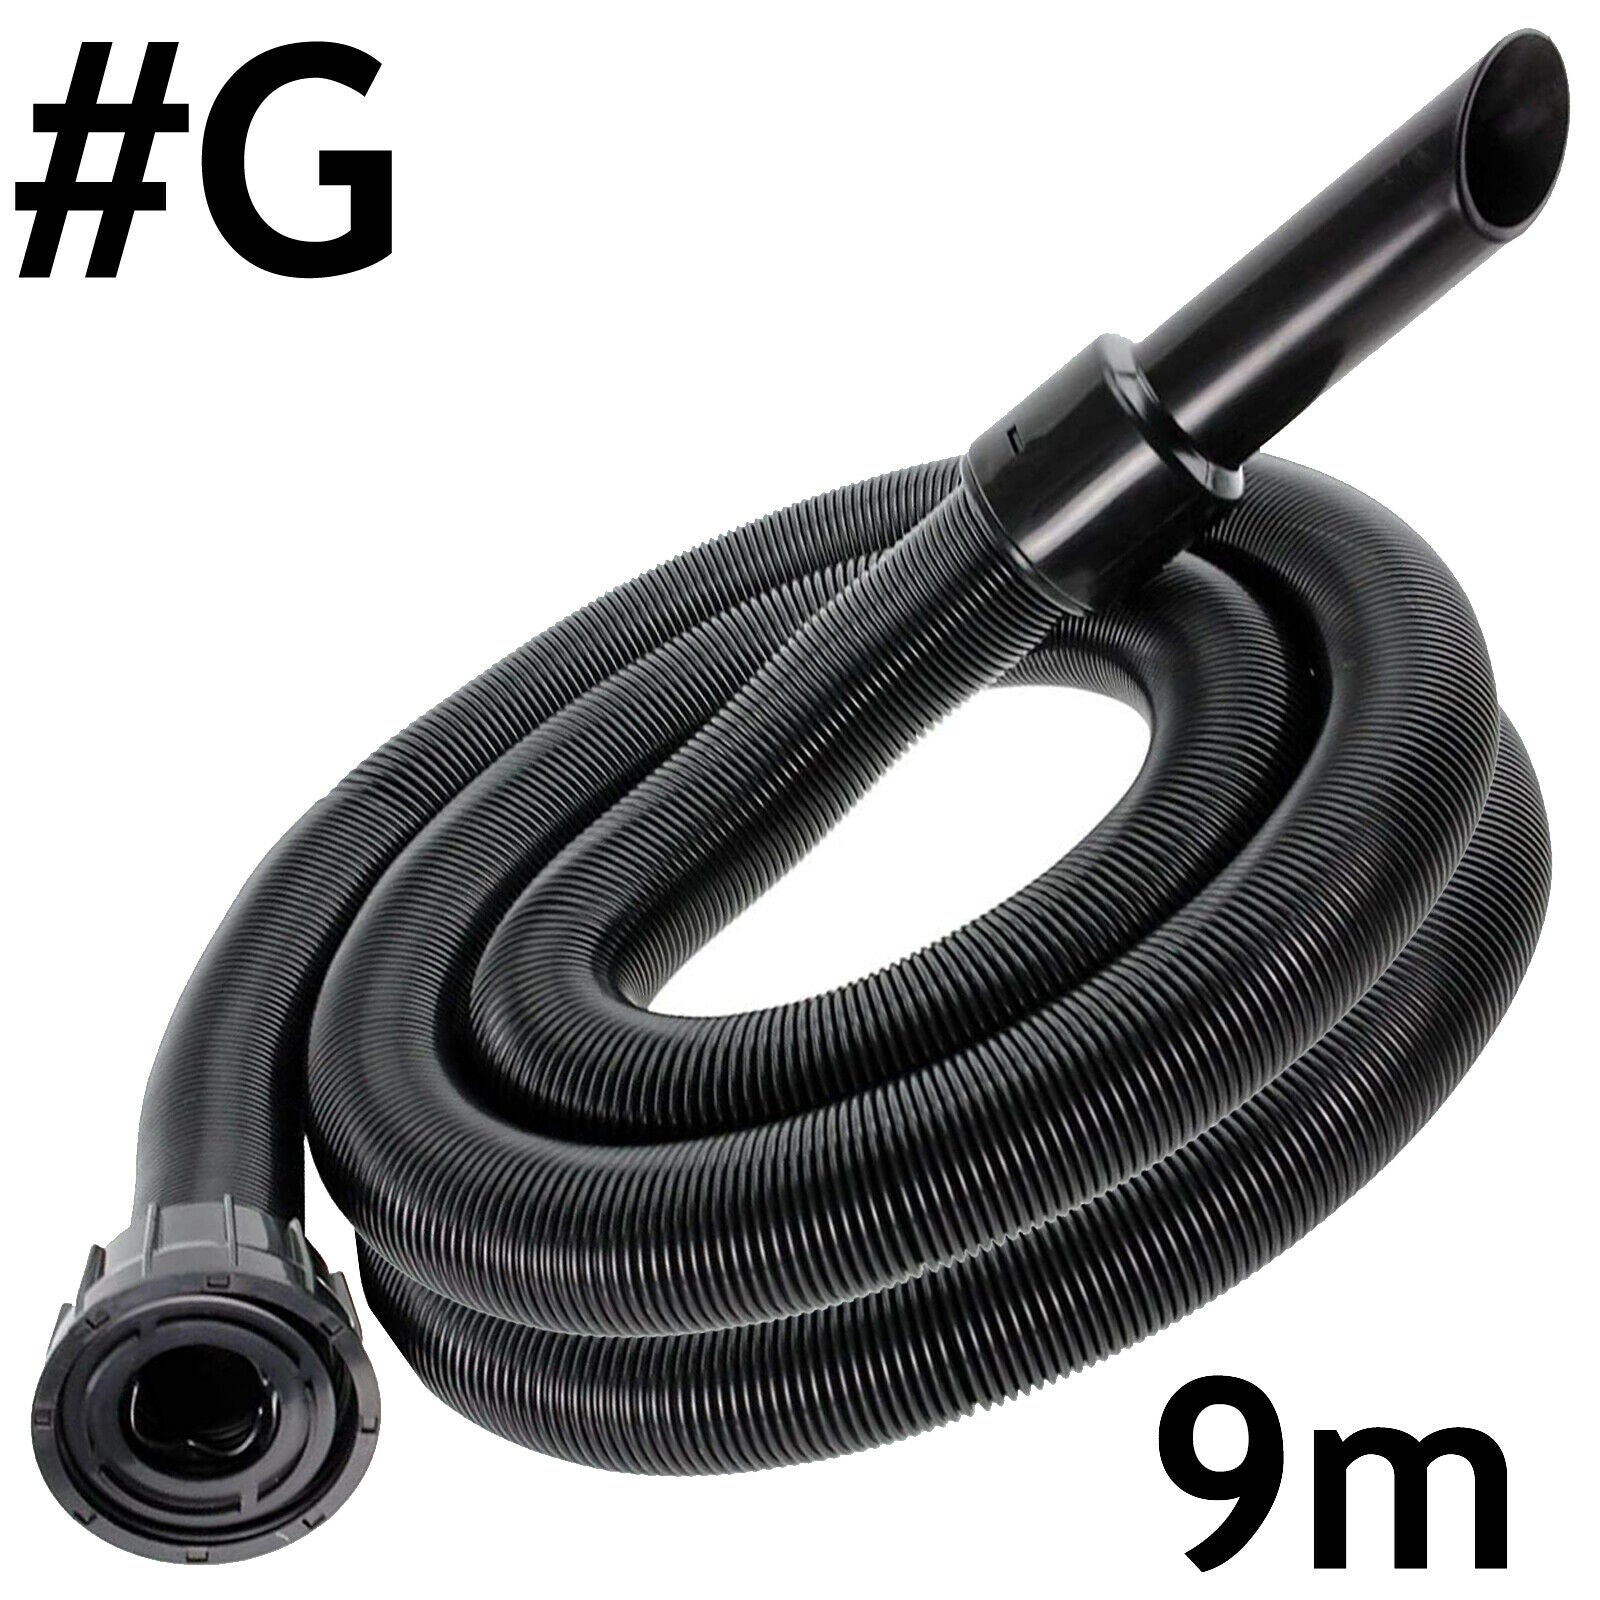 Hose for NUMATIC Vacuum HENRY Hoover Pipe Kit GEORGE Replacement Parts Cuff 32mm